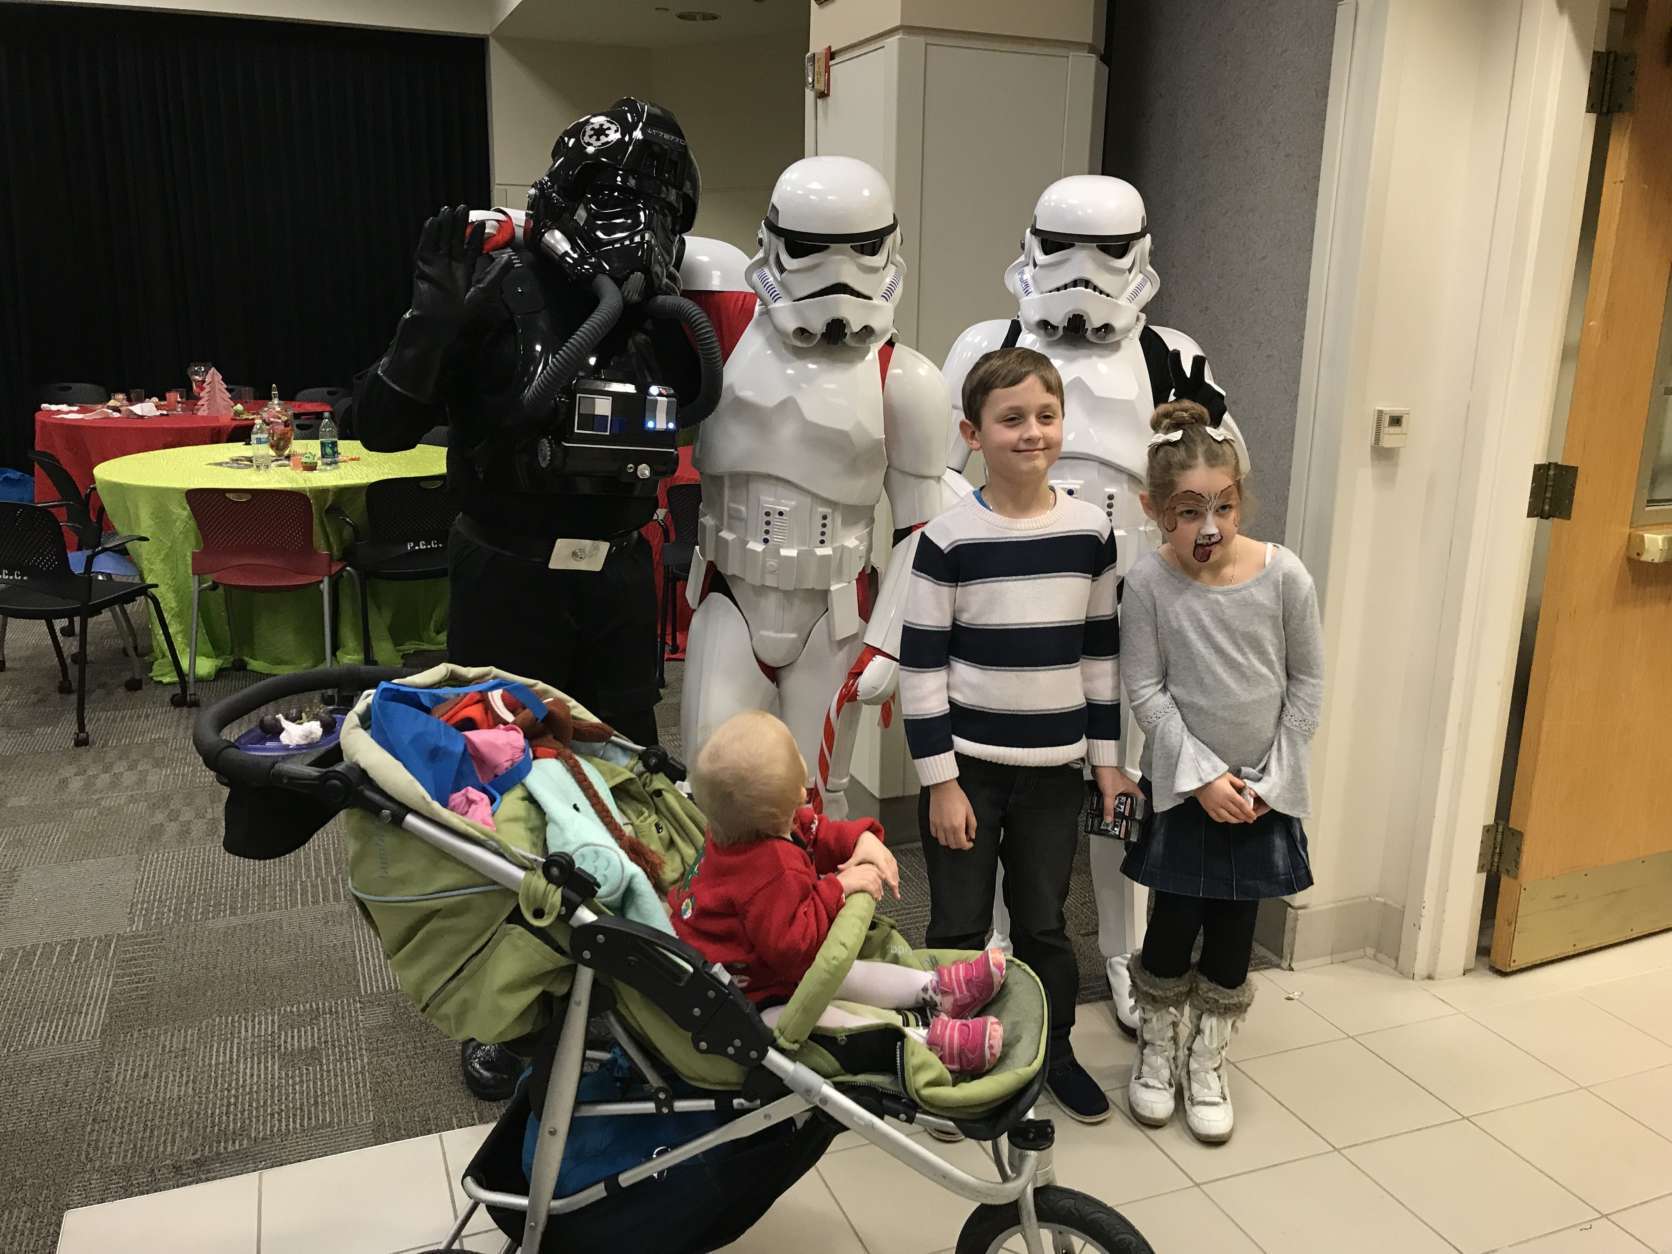 Three Star Wars bad guys pose with three kids, including one who can’t stop staring. (WTOP/Michelle Basch)